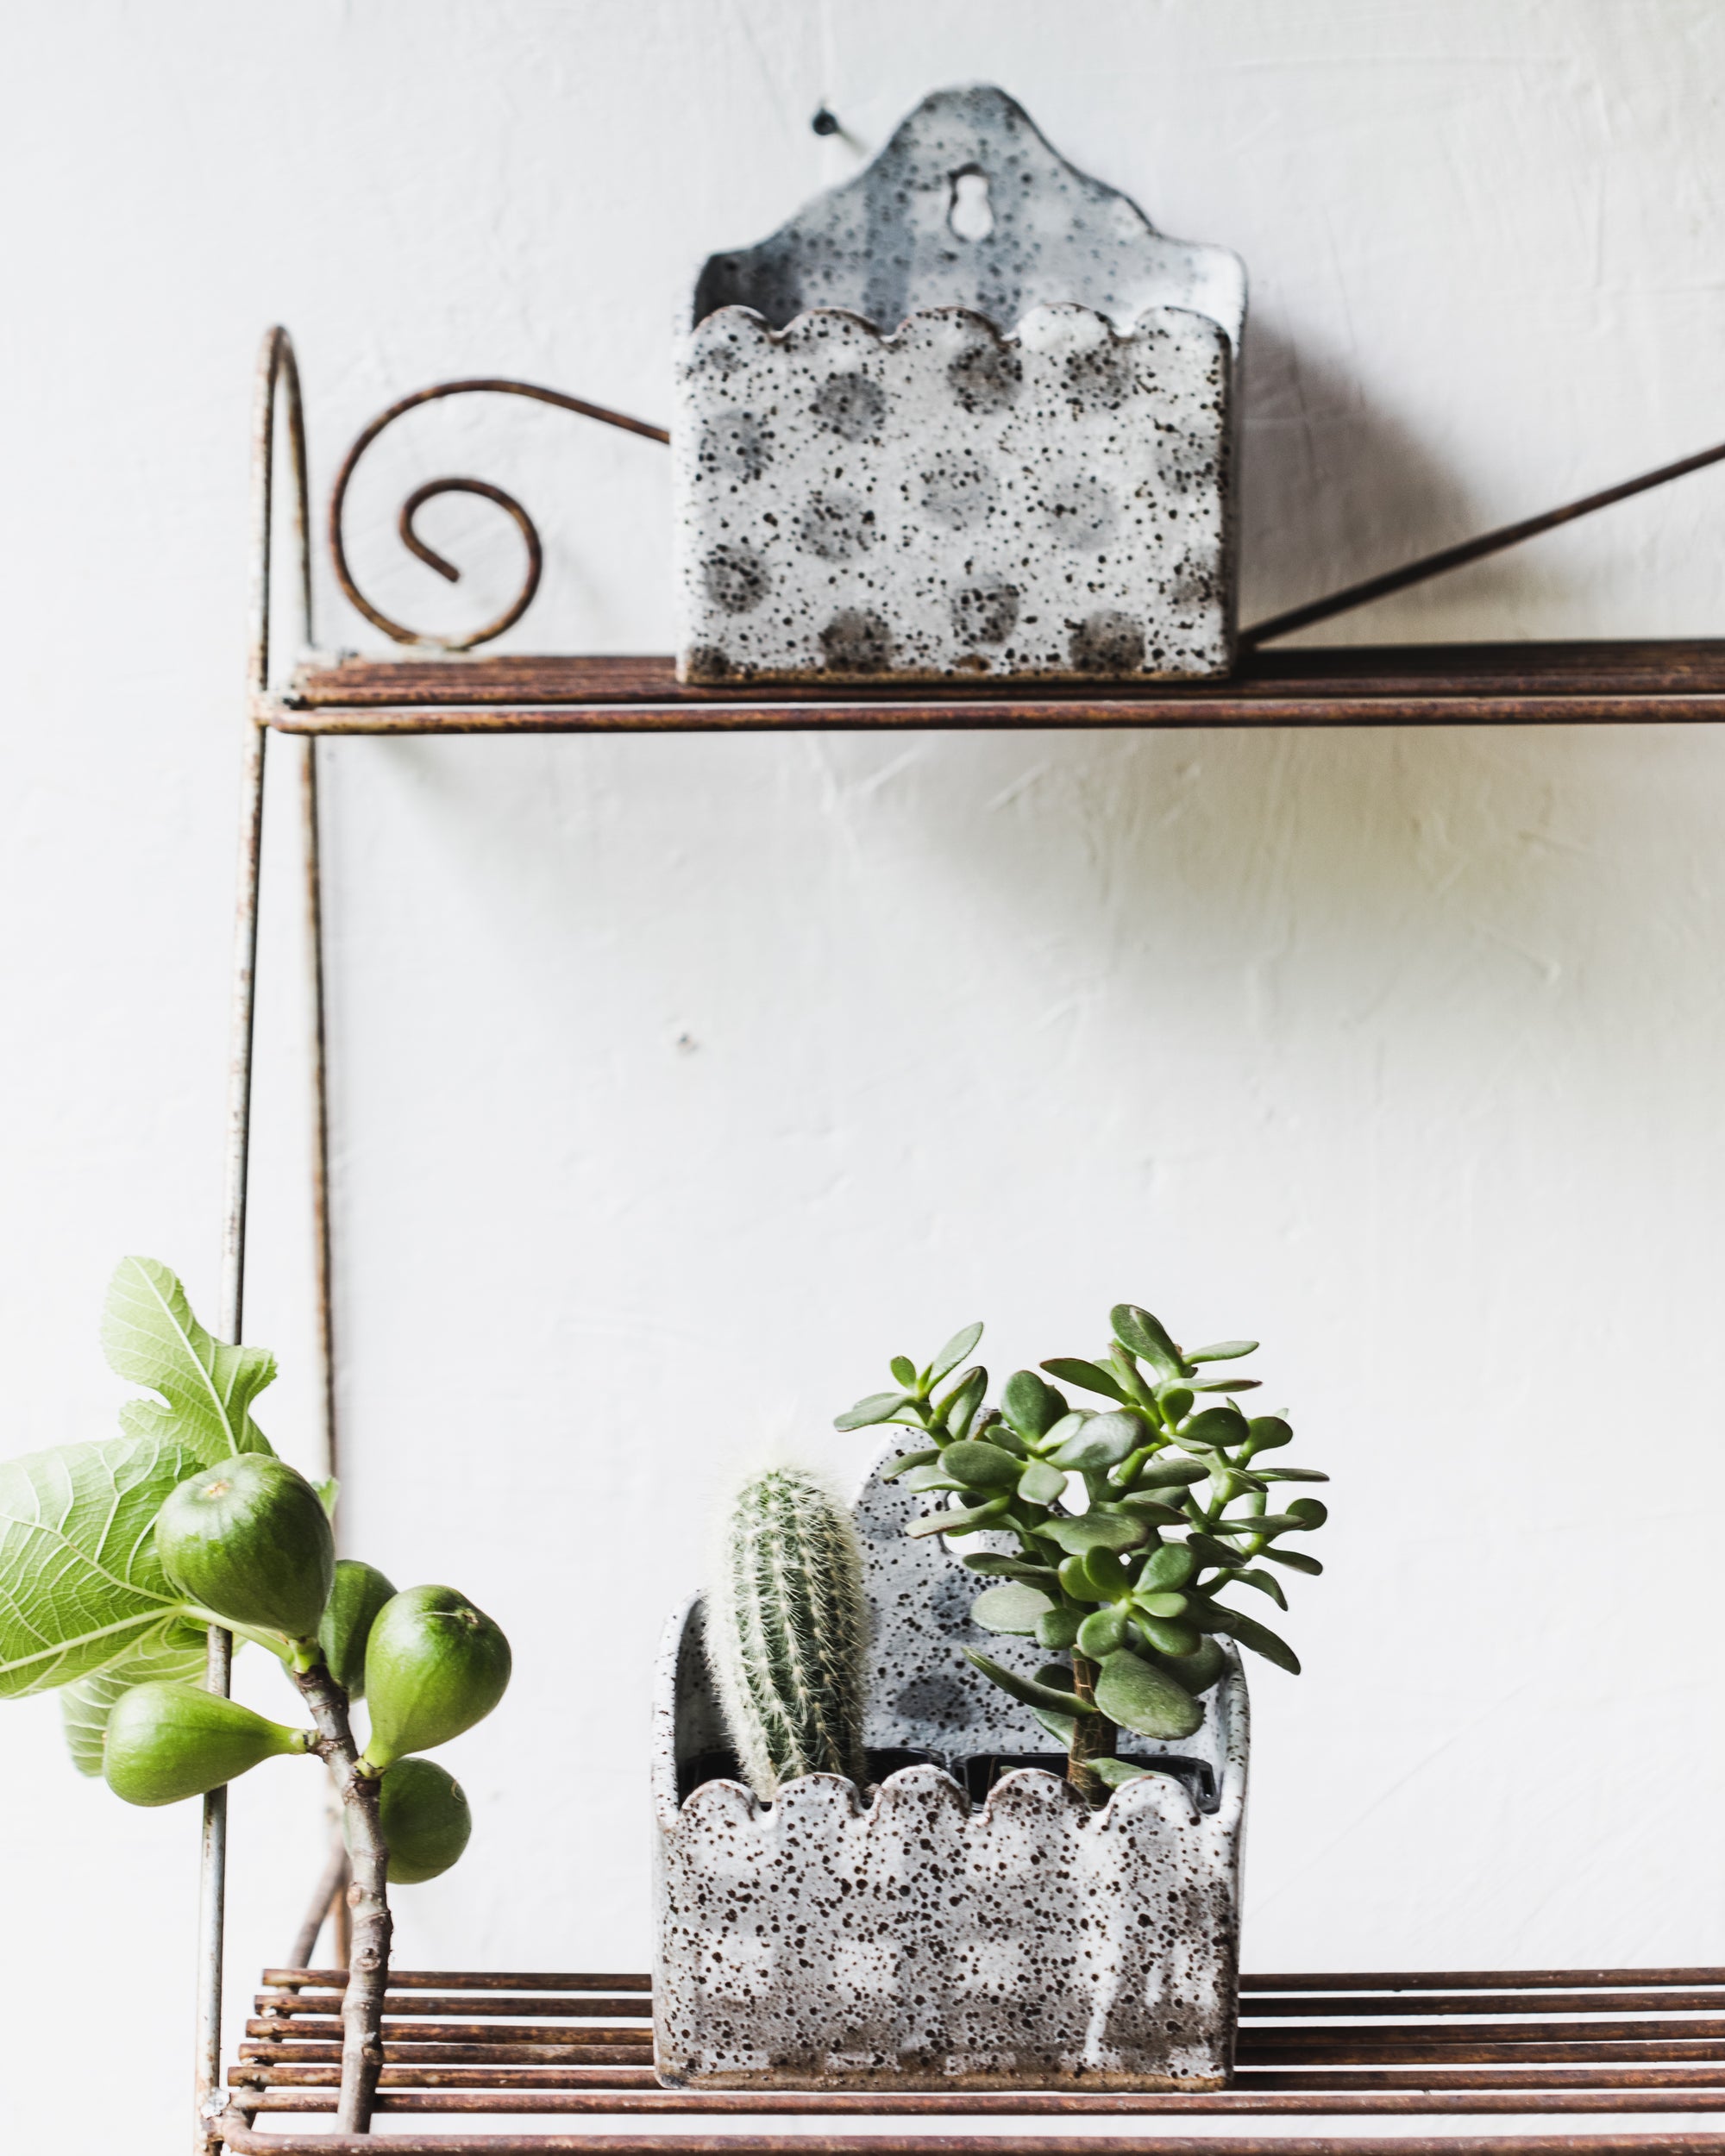 Hanging rustic speckled wall planter boxes with scalloped rim front and high back in grey/white speckled finish by Clay Beehive ceramics